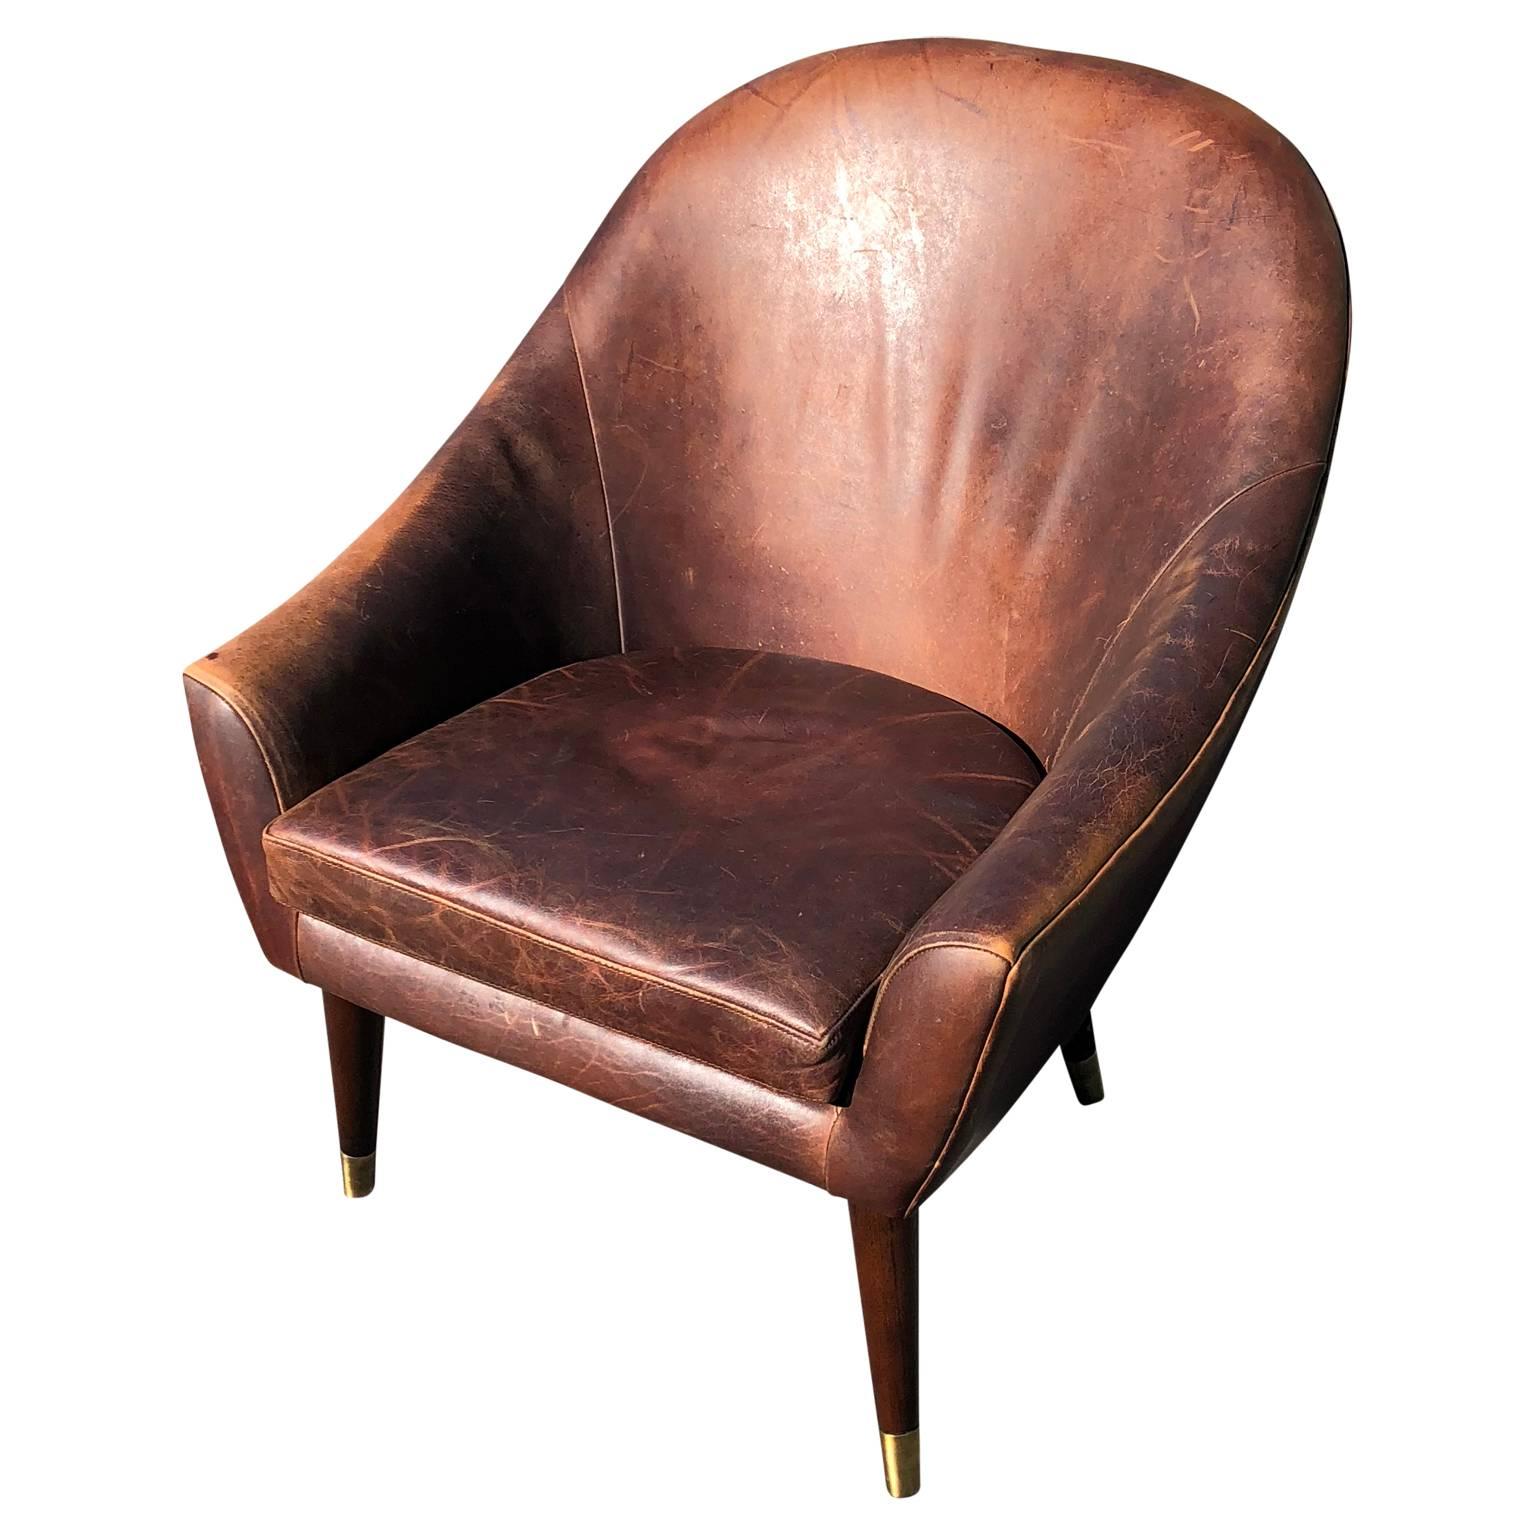 Vintage high back leather club chair with brass caped feet

$125 flat rate front door delivery includes Washington DC metro, Baltimore and Philadelphia.